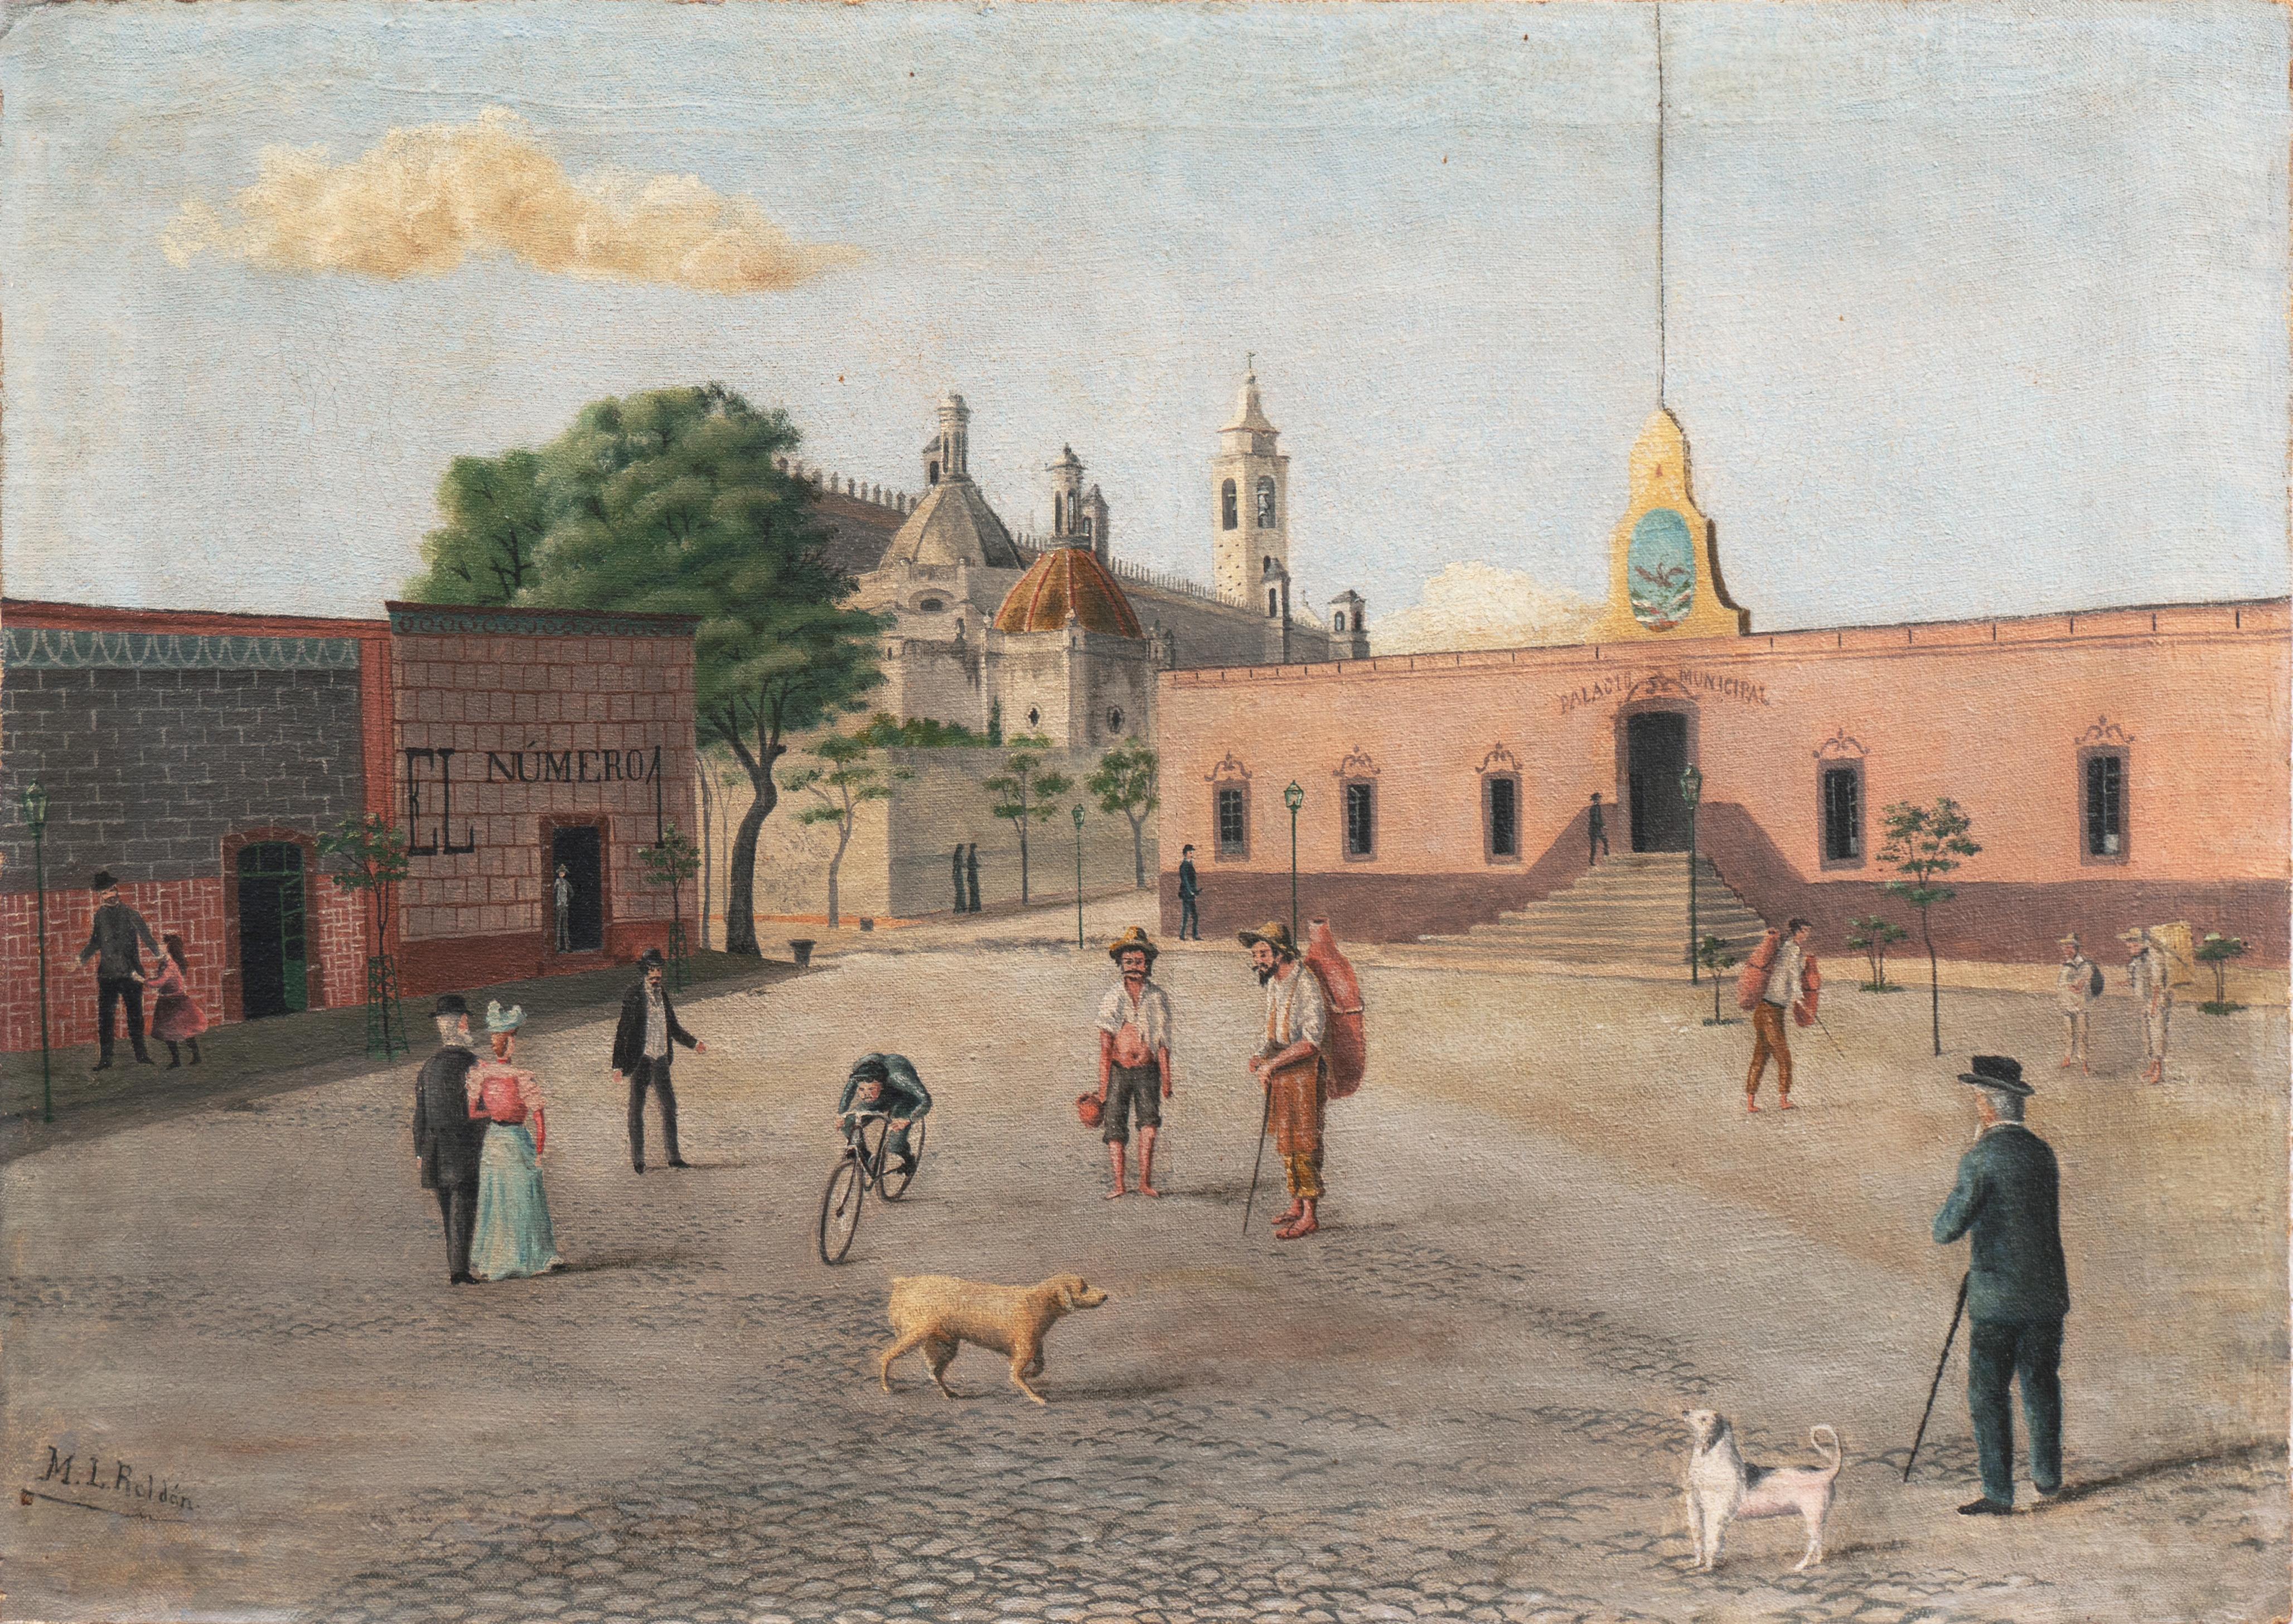 M. L. Roldán Landscape Painting - 'Mexican Plaza', Palacio Municipal, Cobbled Square, Paseo, 19th Century Oil